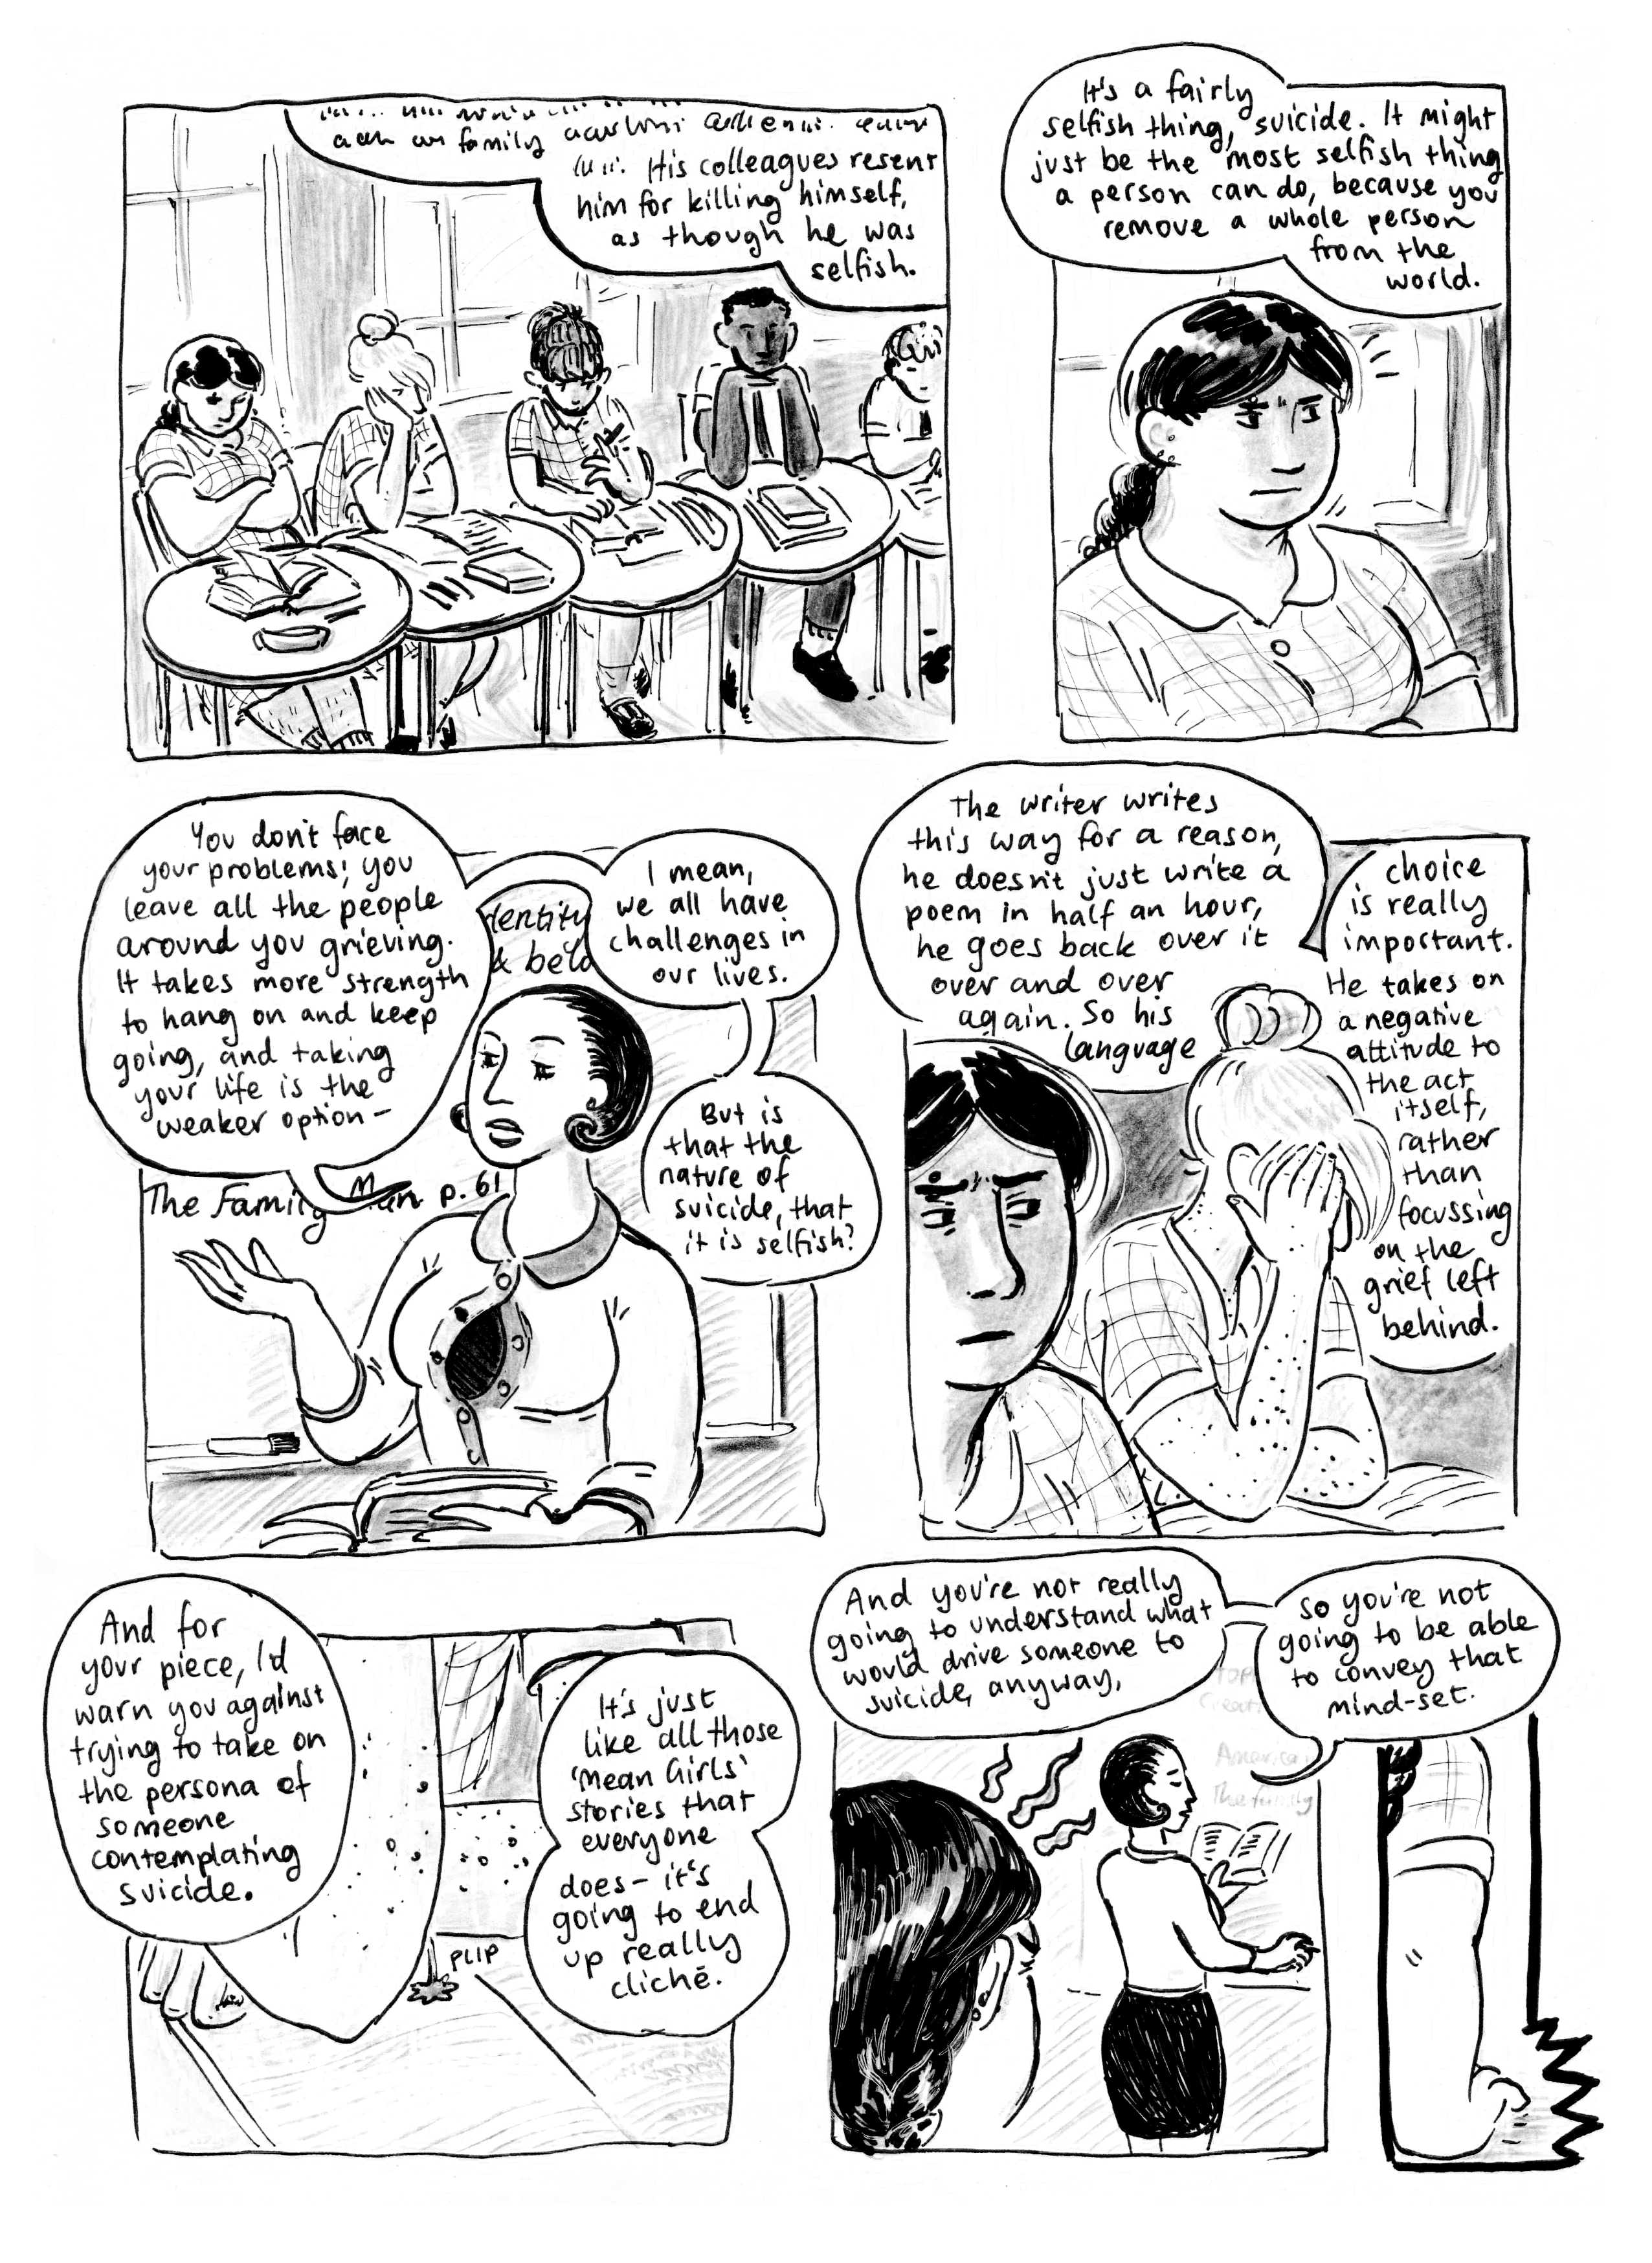 Nothing in my comic is based specifically on real life, except this one monologue which my teacher did actually say. 